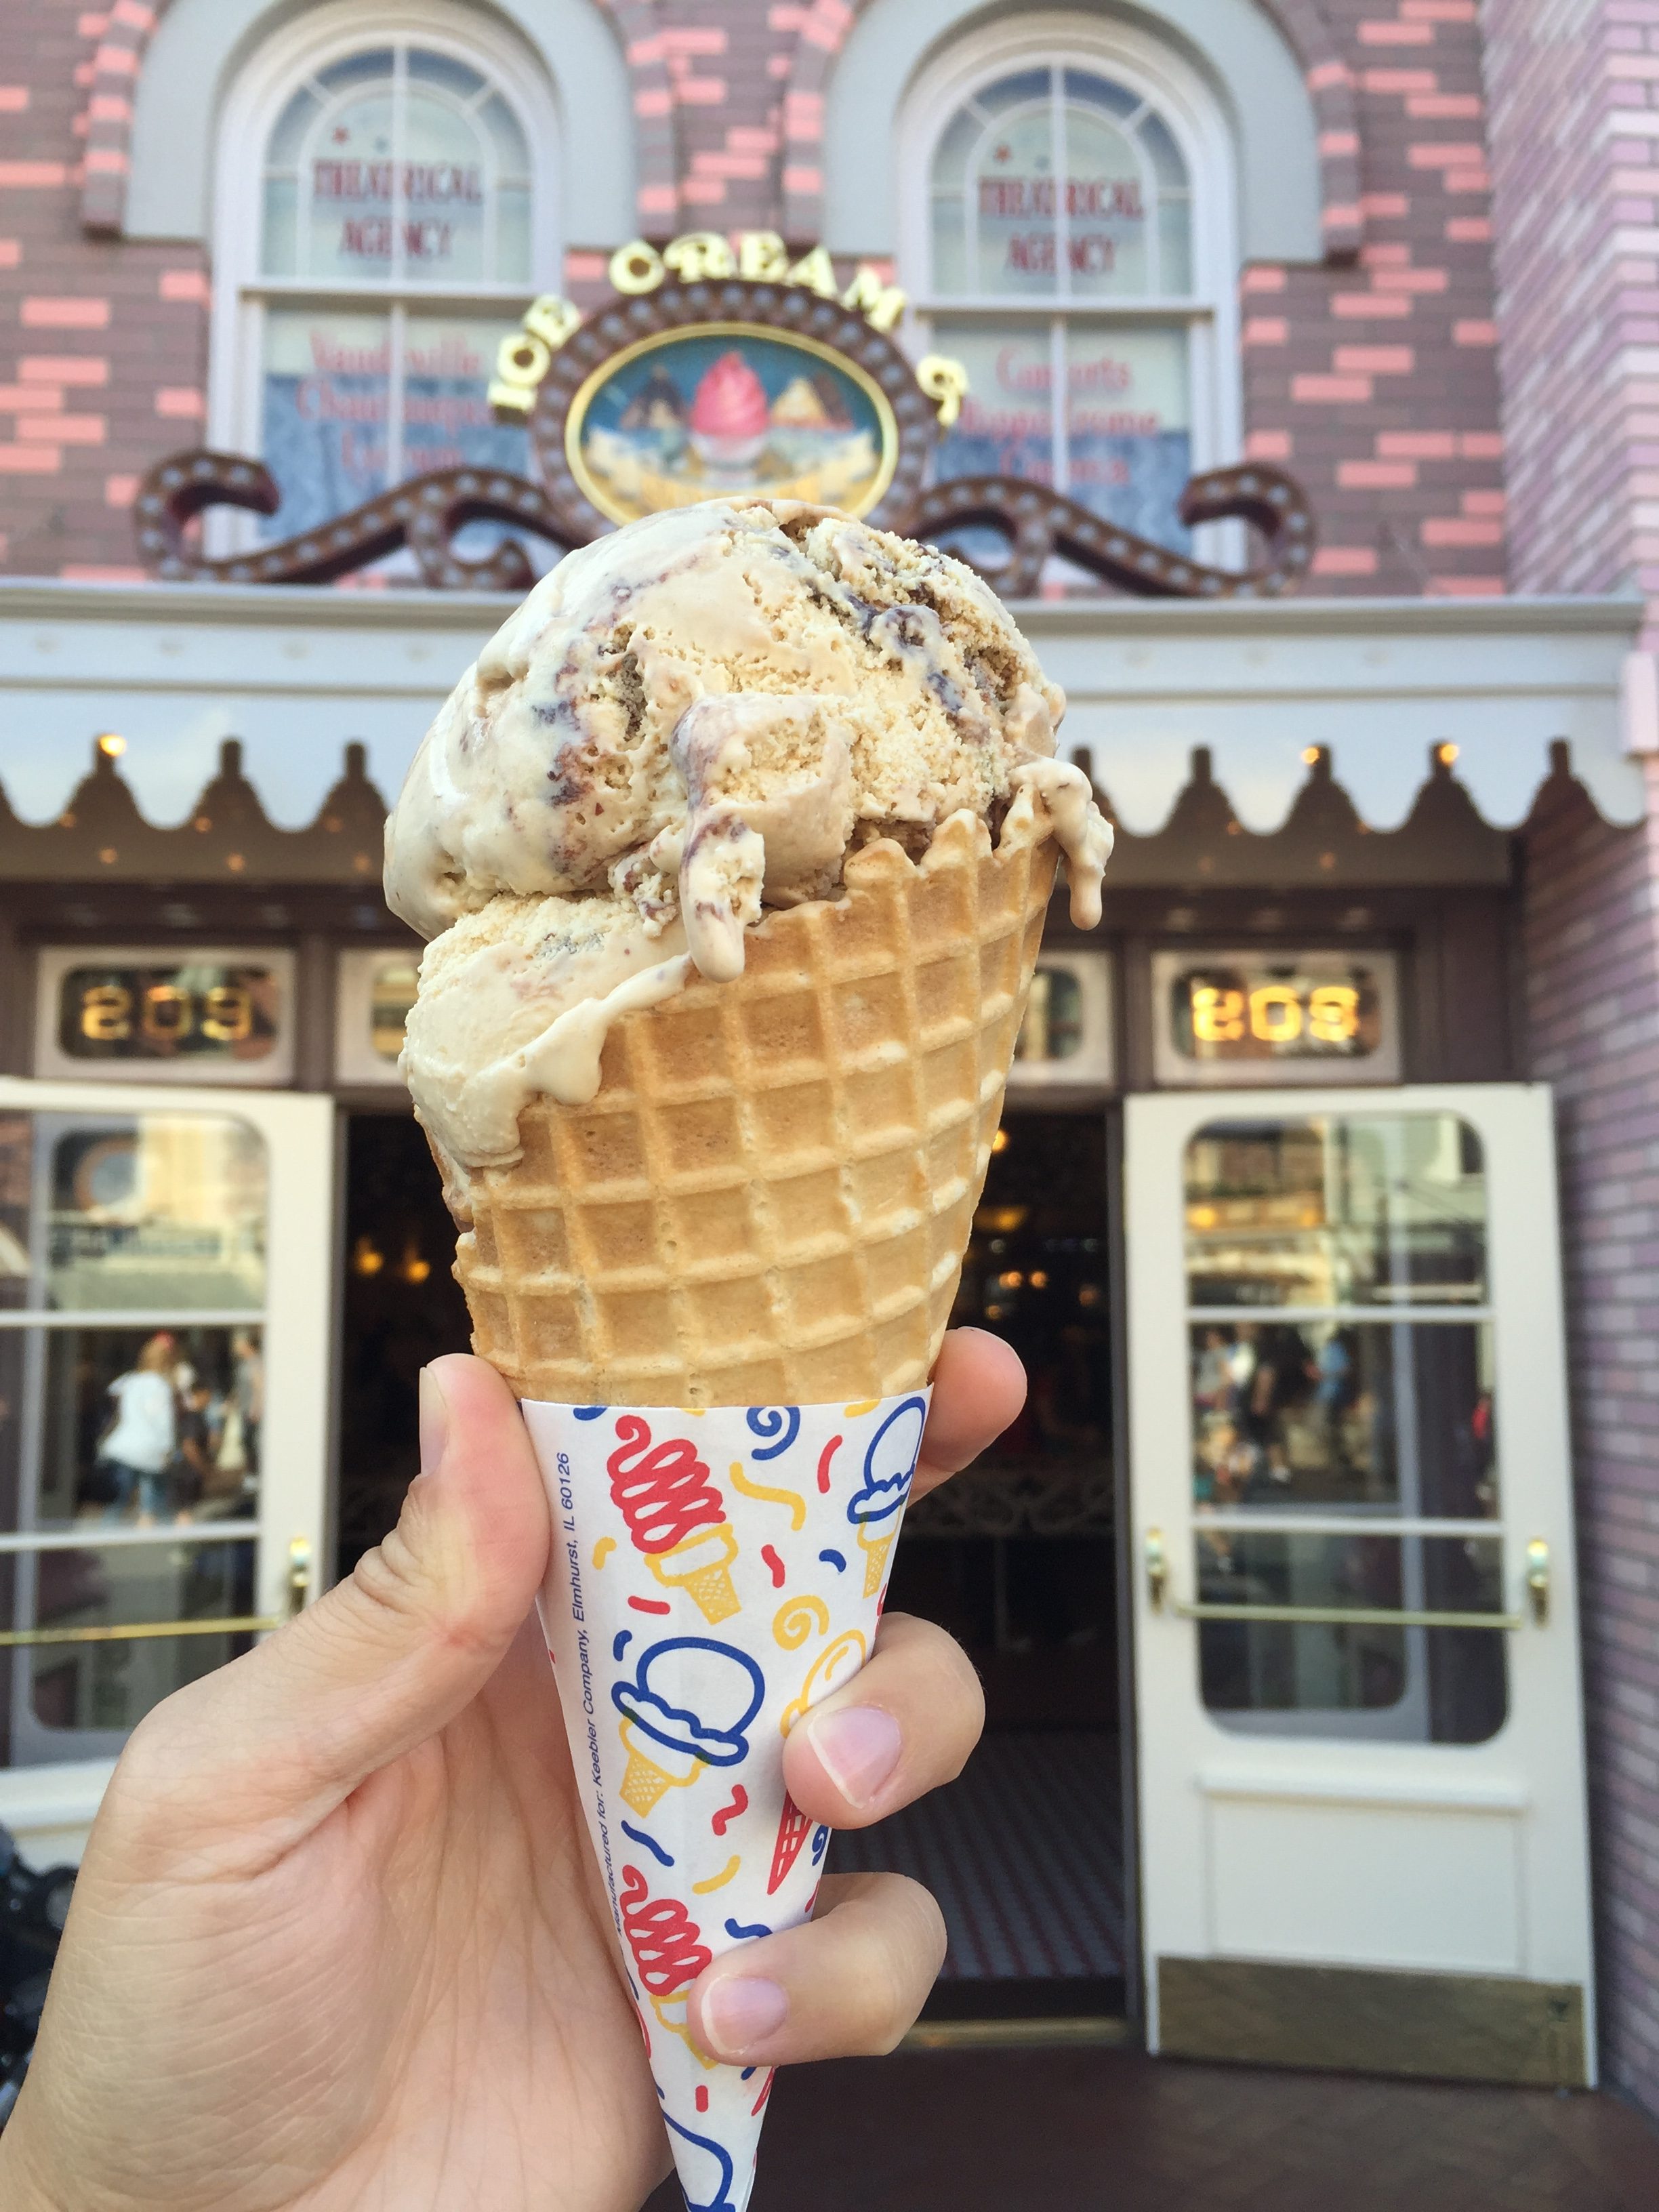 Disneyland enthusiasts share their 10 favorite eats in the park - The